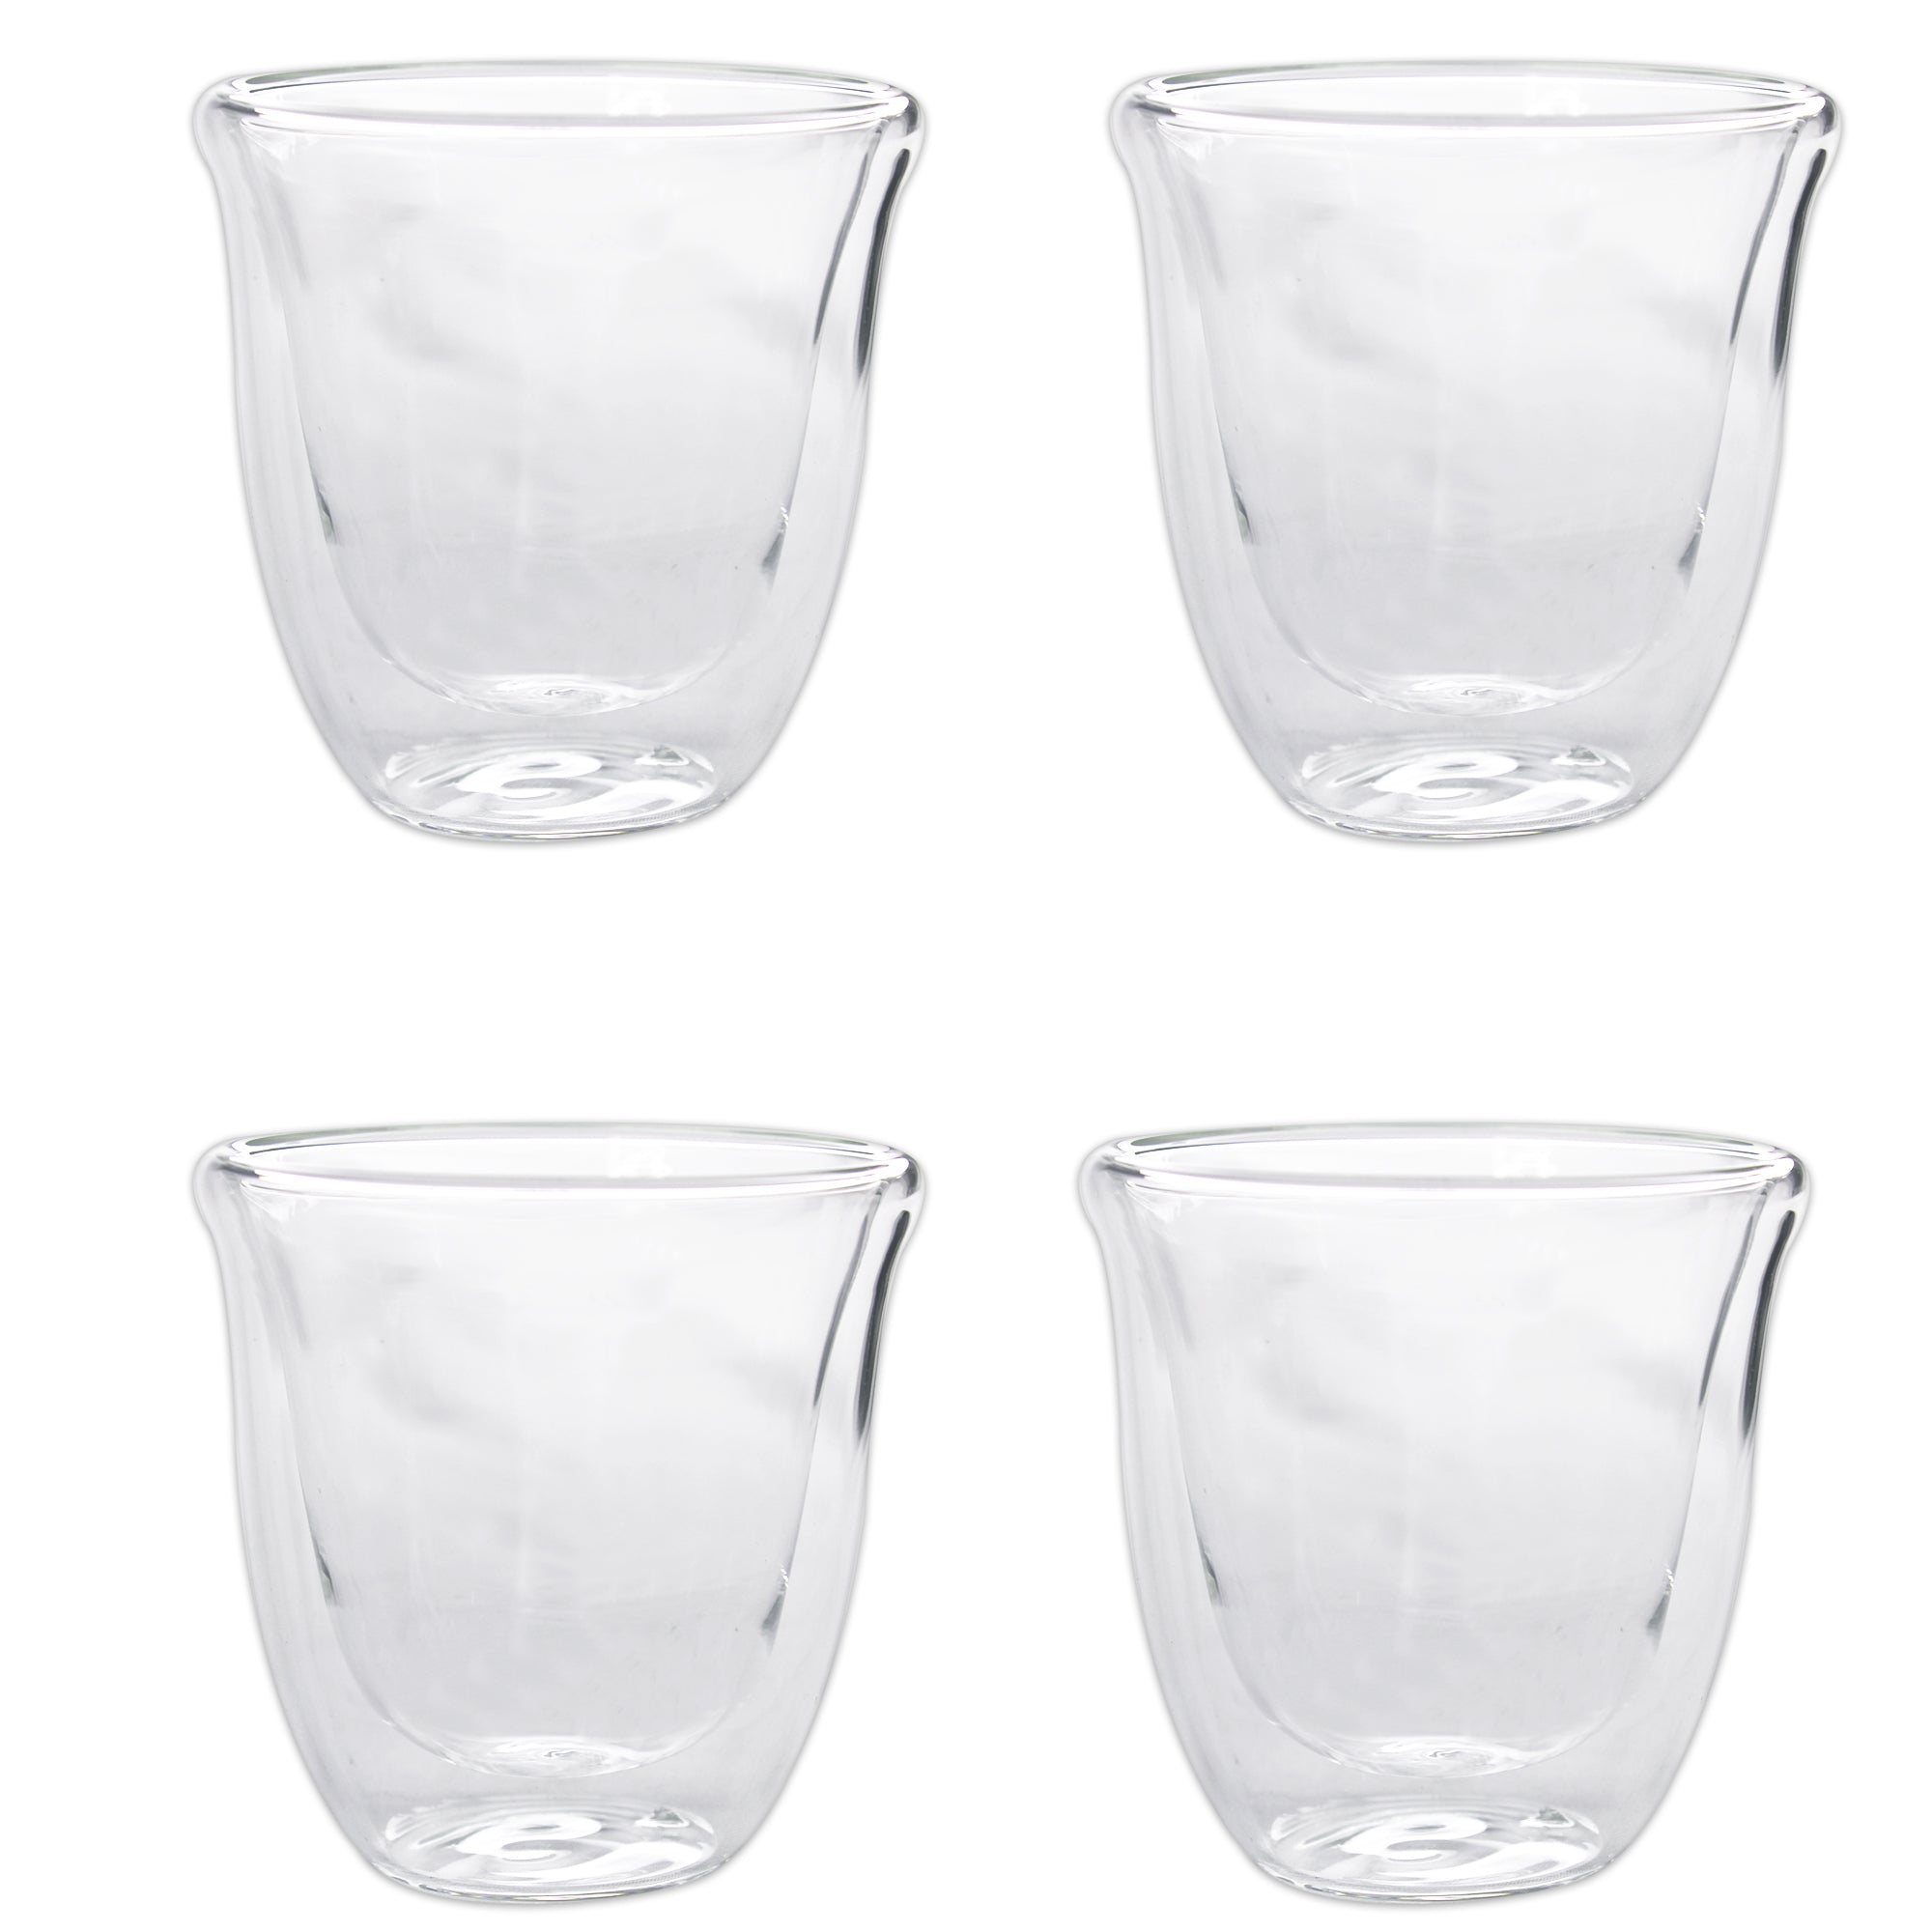 LMA Double-Wall Hot and Cold Beverage Espresso Cups - Set of 4 - 80ml